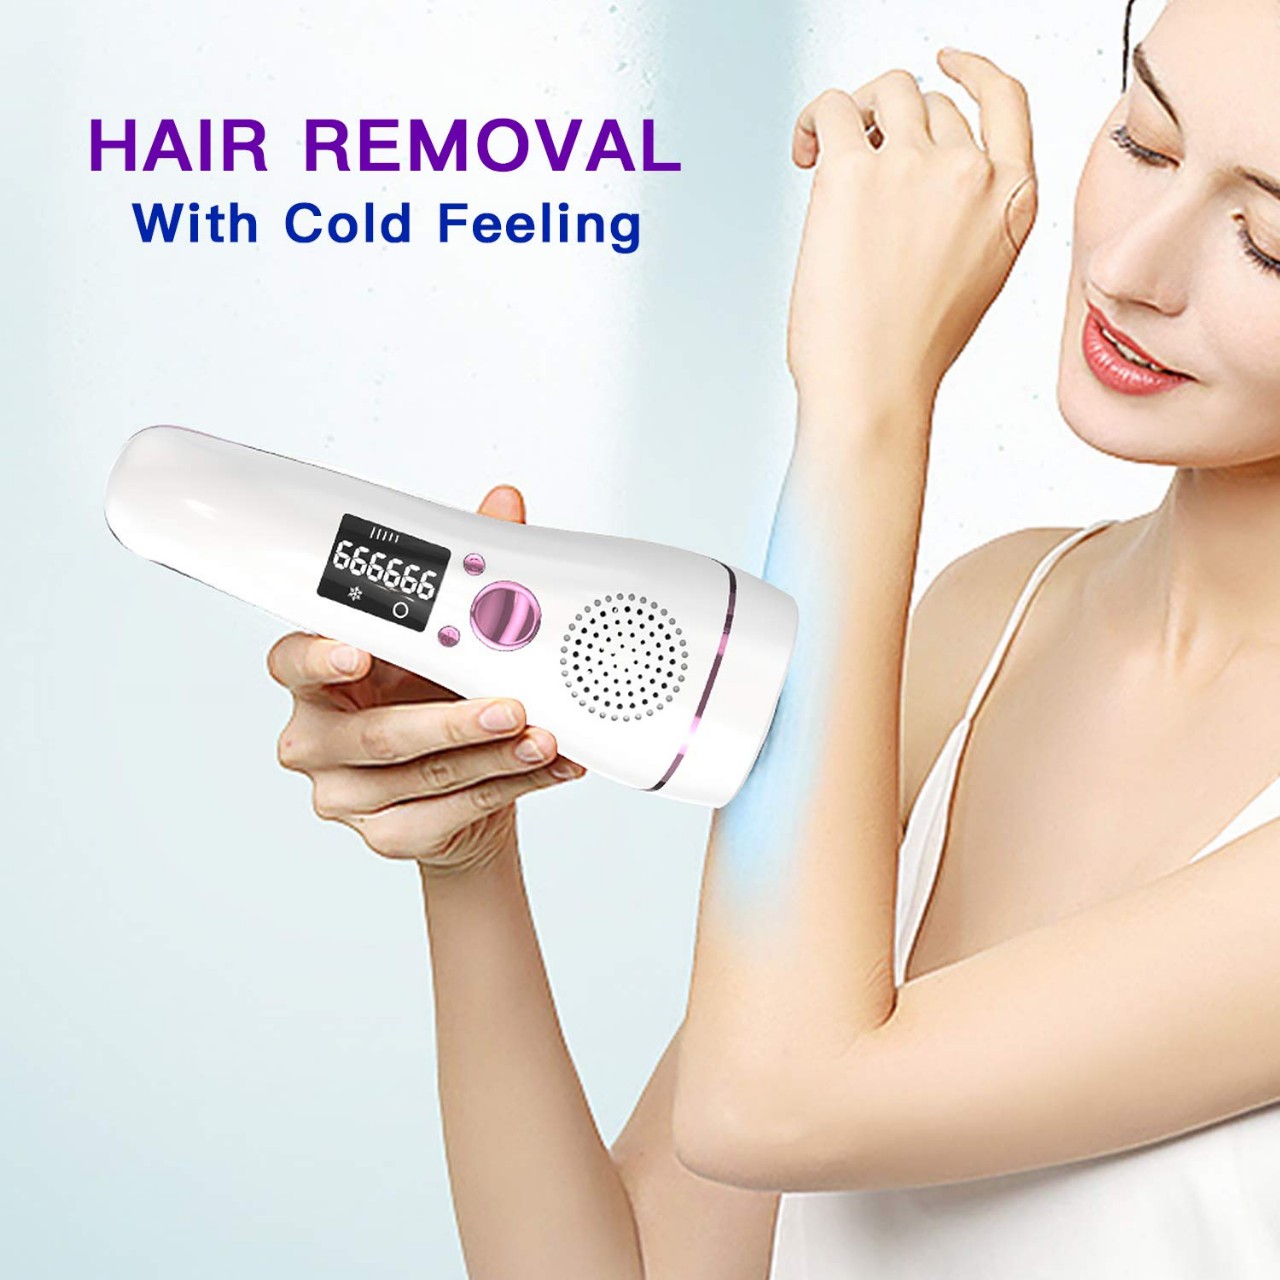 Ice Hair Removal for Women At-Home Painless IPL Hair Removal Permanent UPGRADE to 999,999 Flashes